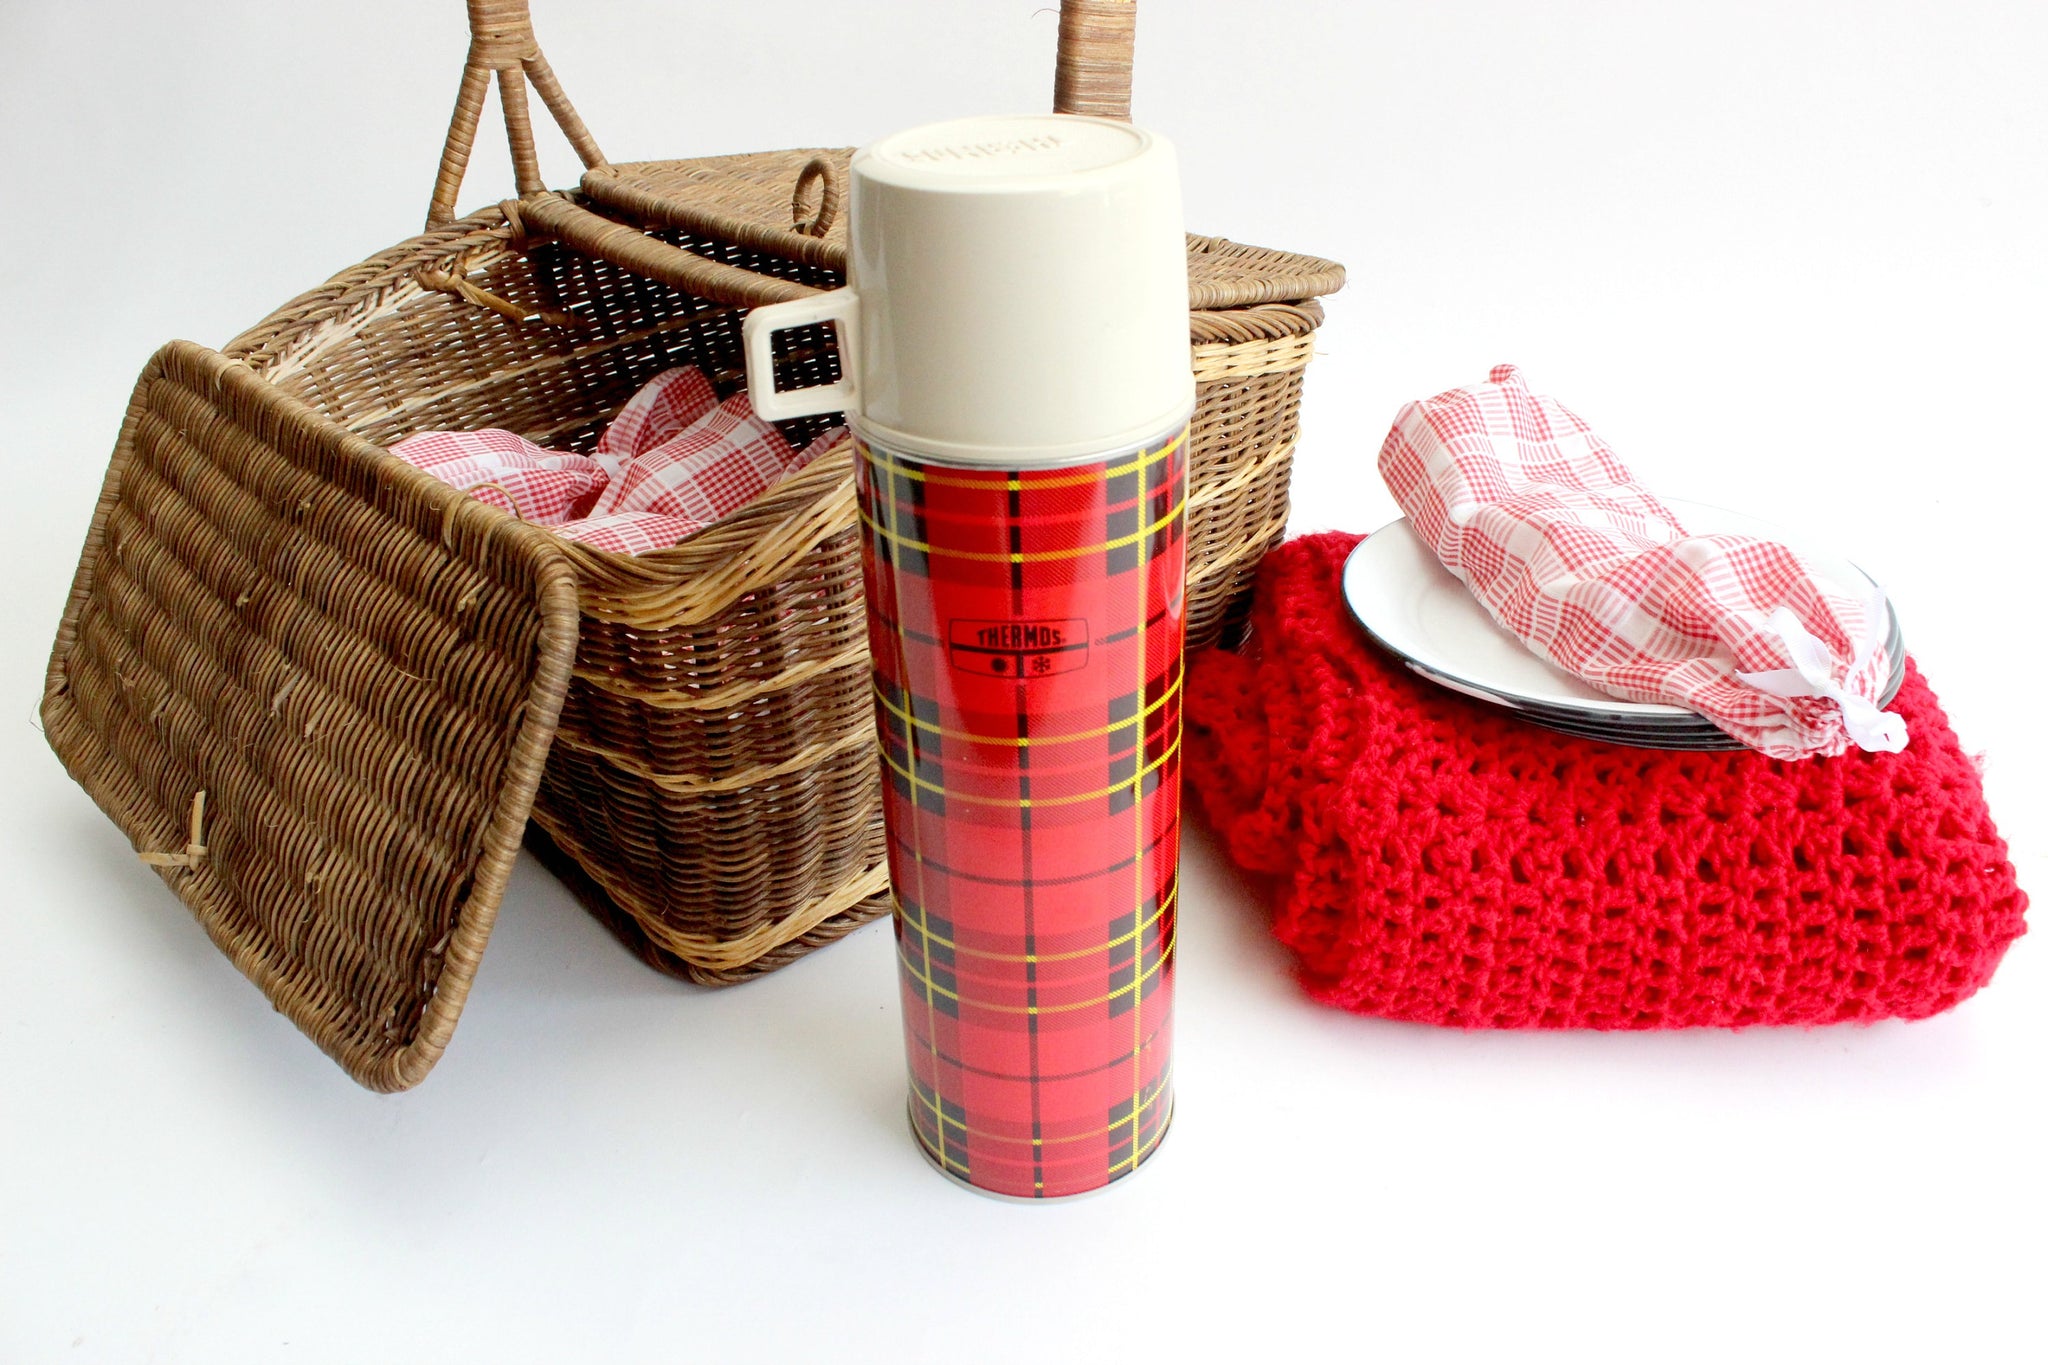 Vtg Red Plaid Thermos Bottle Metal With Cup Glass Insert Retro